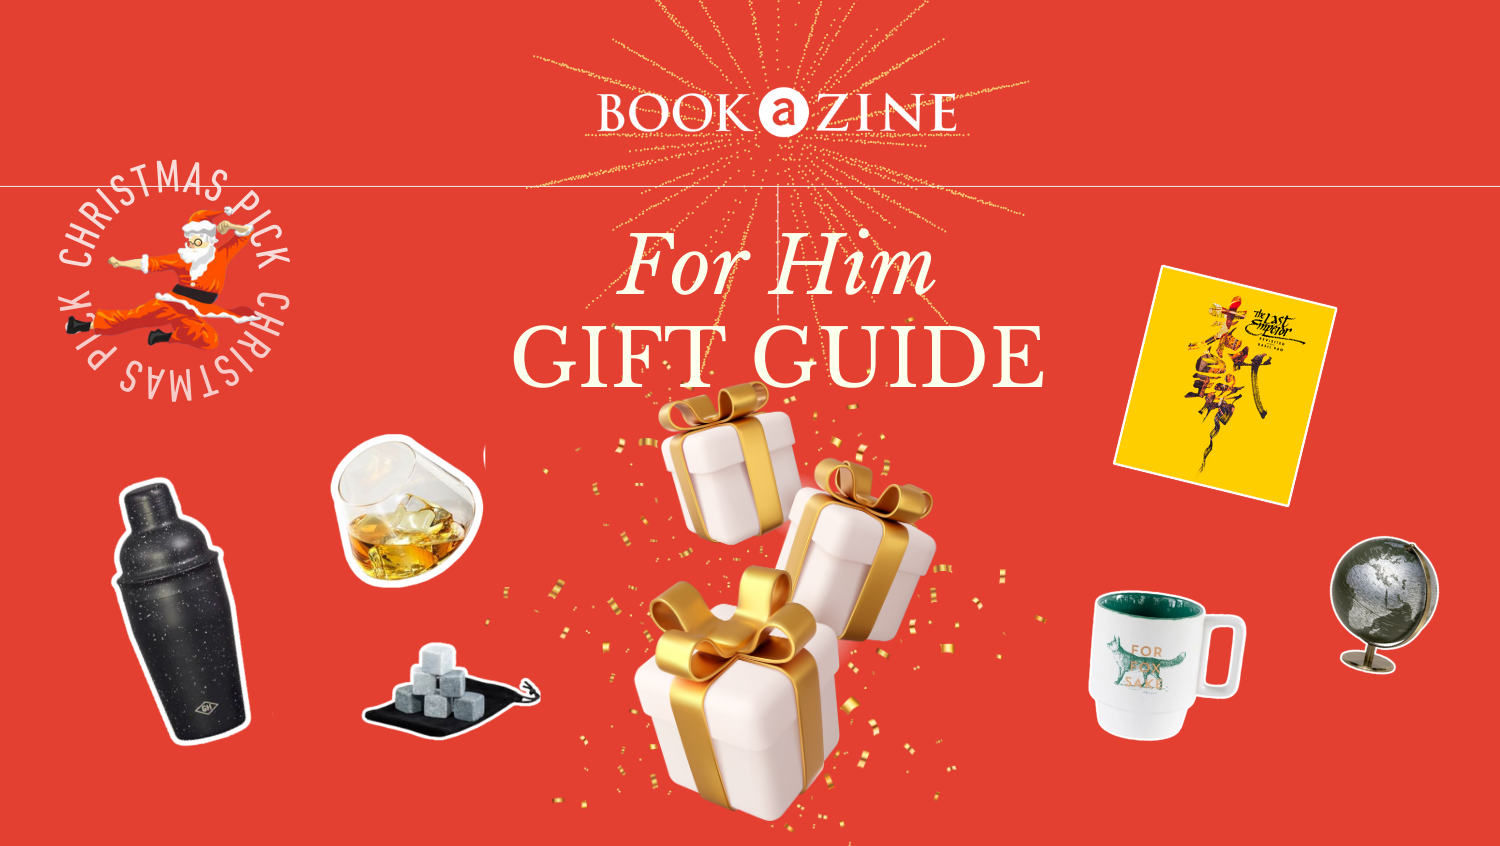 Gifts For Him - Bookazine's Gift Guide